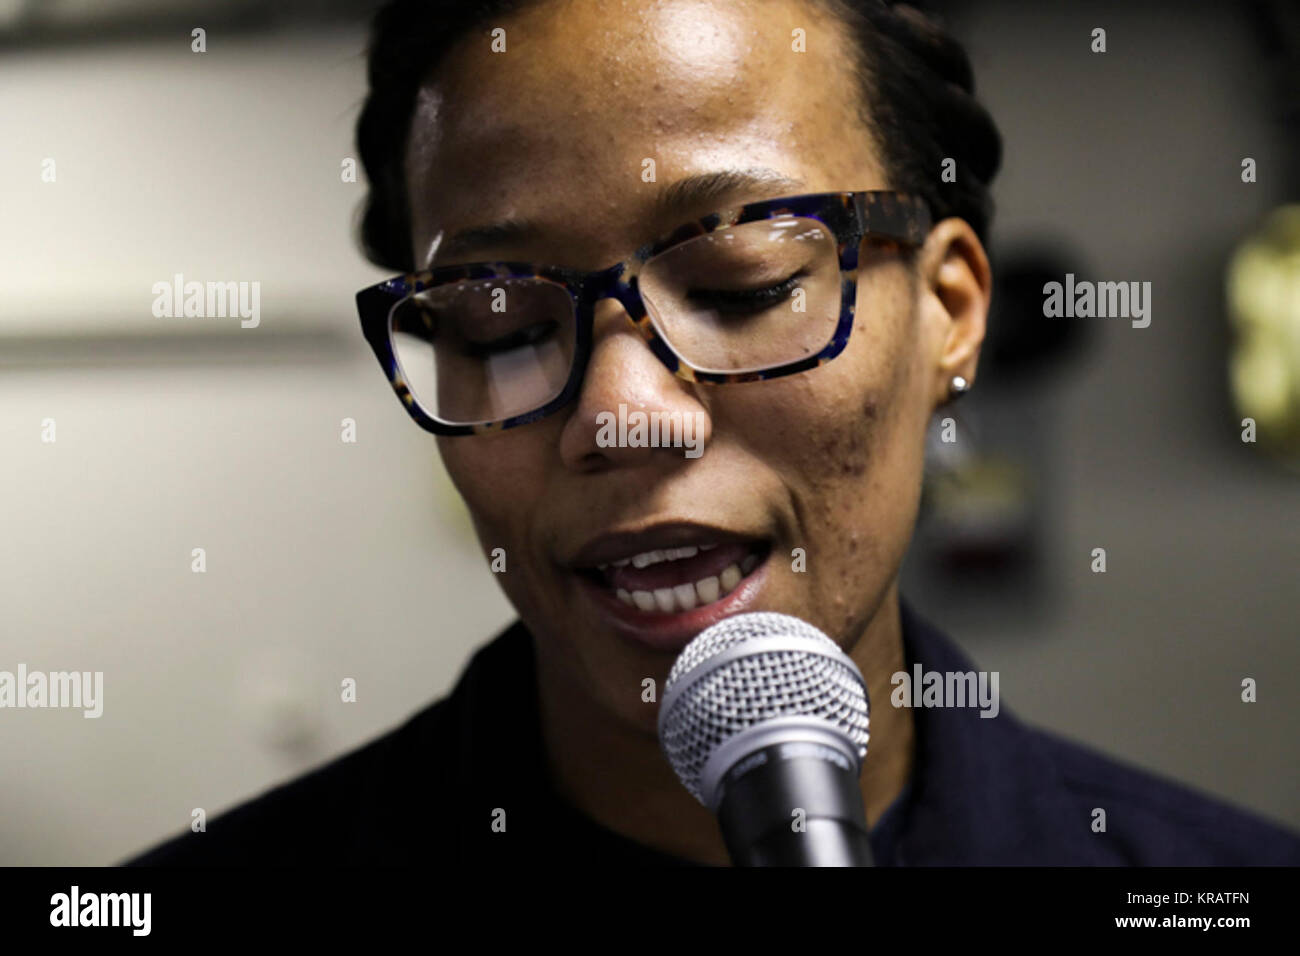 OCEAN (Dec. 12, 2017) Logistics Specialist 3rd Class Desiree Alston reads a poem during a poetry slam held in the mess decks aboard the Nimitz-class aircraft carrier USS Abraham Lincoln (CVN 72). Abraham Lincoln’s Morale, Welfare and Recreation (MWR) hosts events like this so Sailors can express themselves at sea. (U.S. Navy Stock Photo